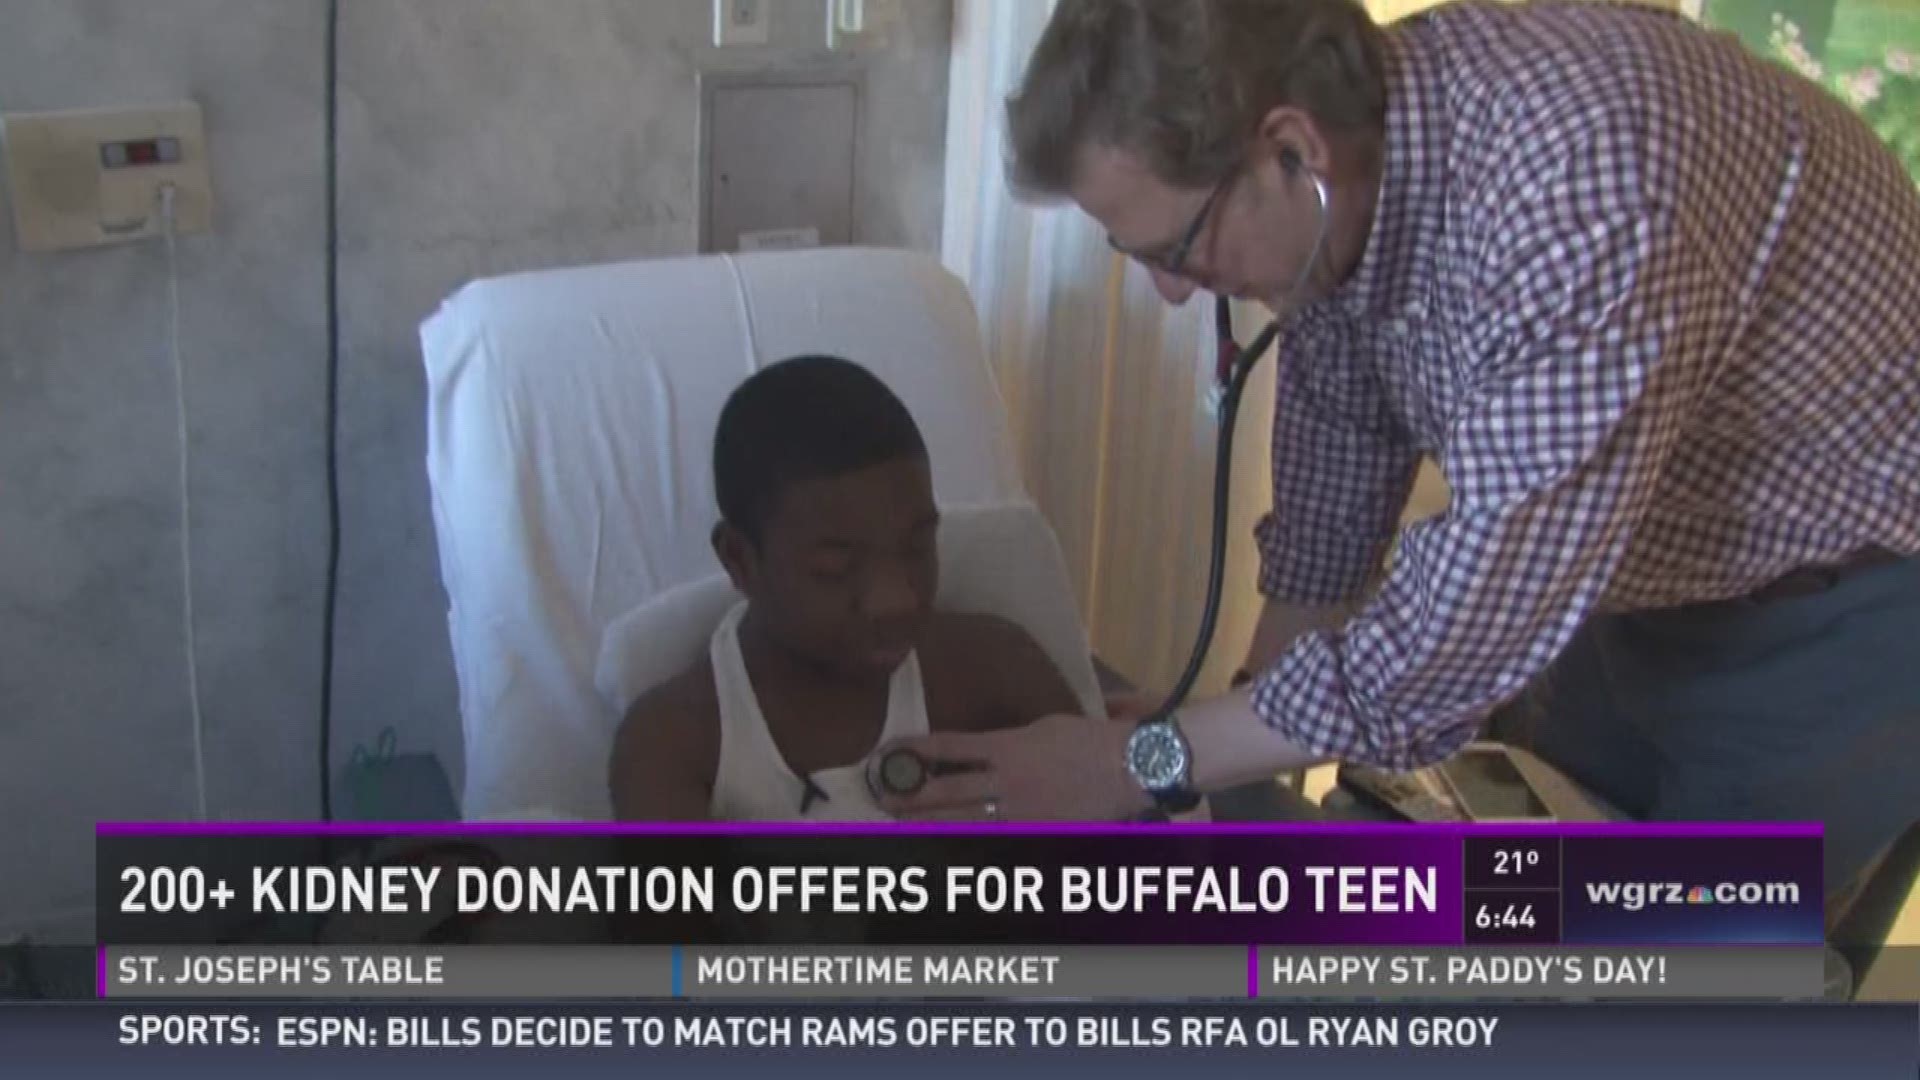 Daybreak's Melissa Holmes has an update on a Buffalo teen who has been waiting for a living kidney donor.